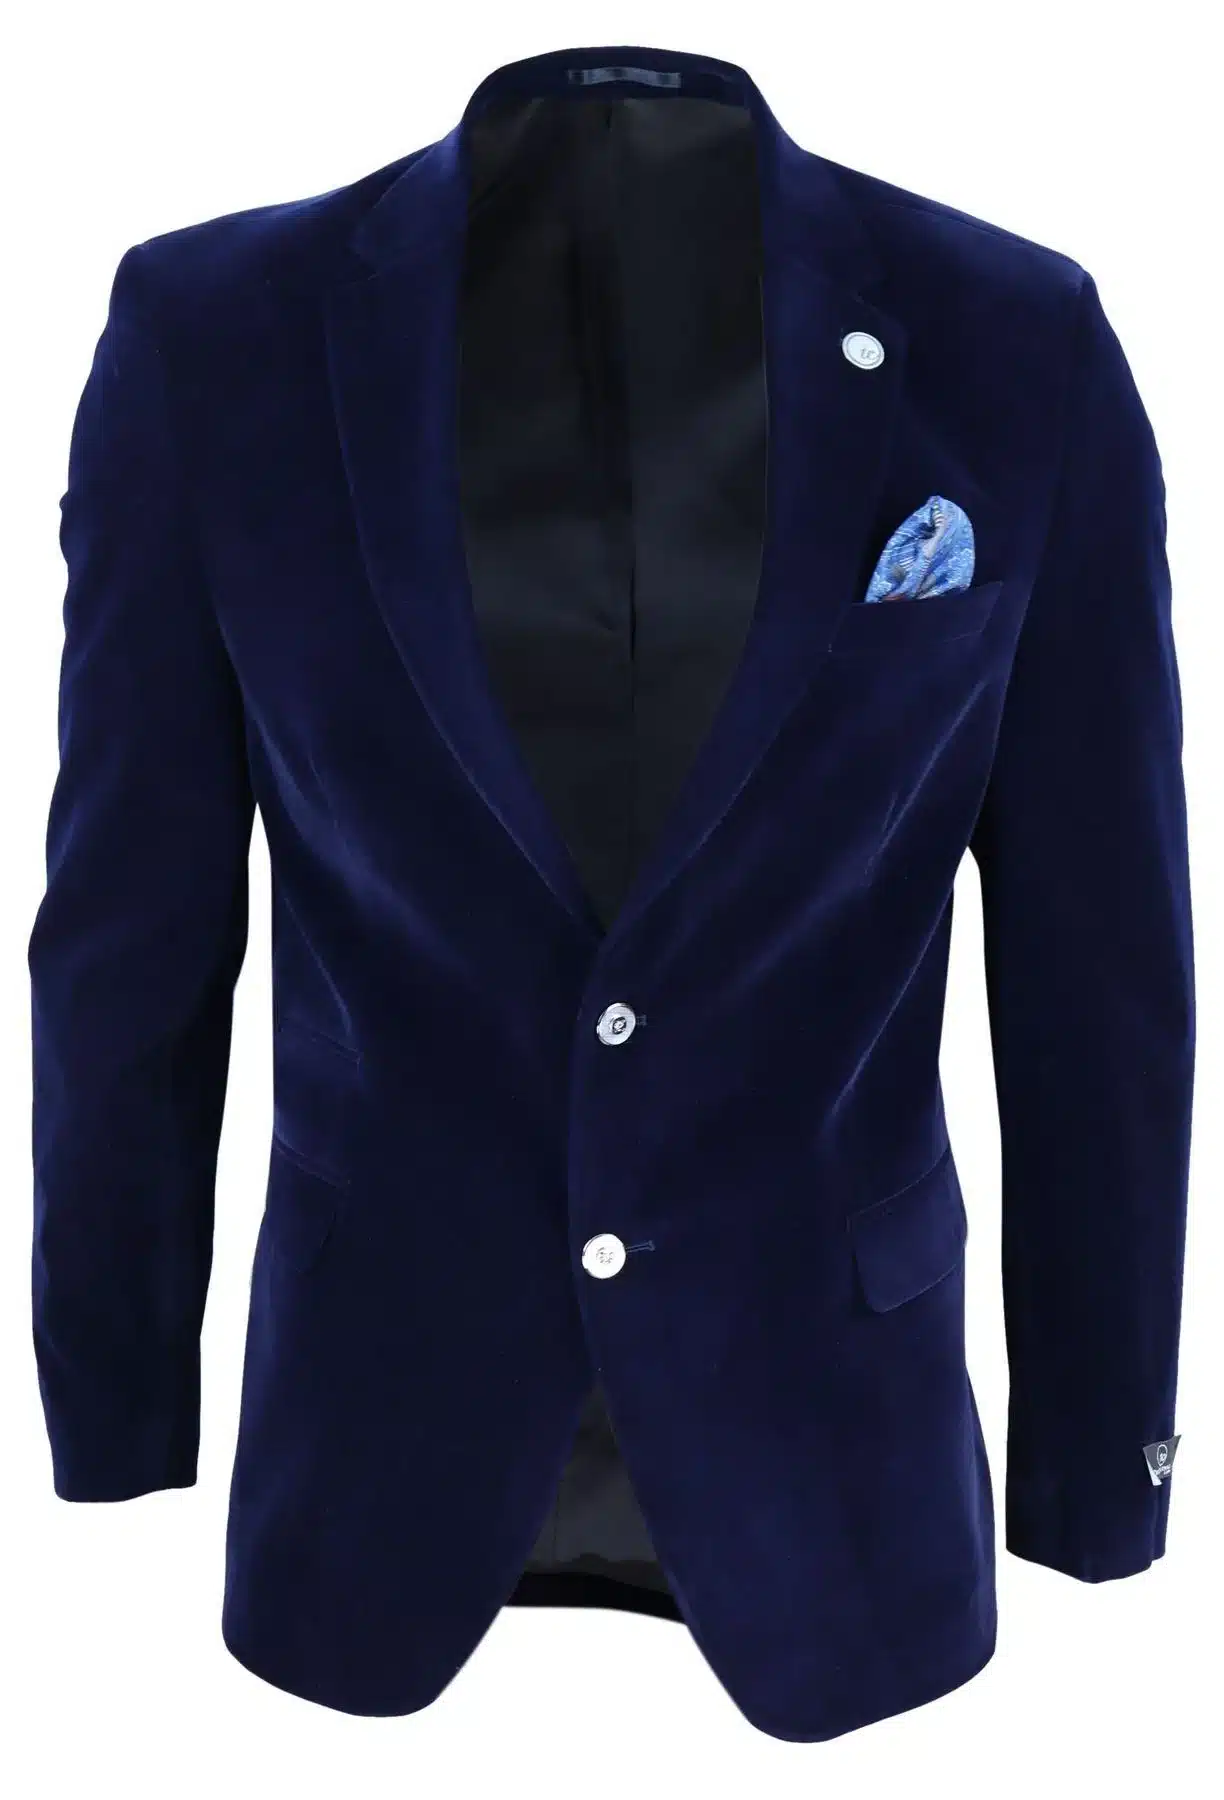 Buy Arrow Tailored Fit Single Breasted Three Piece Suit - NNNOW.com